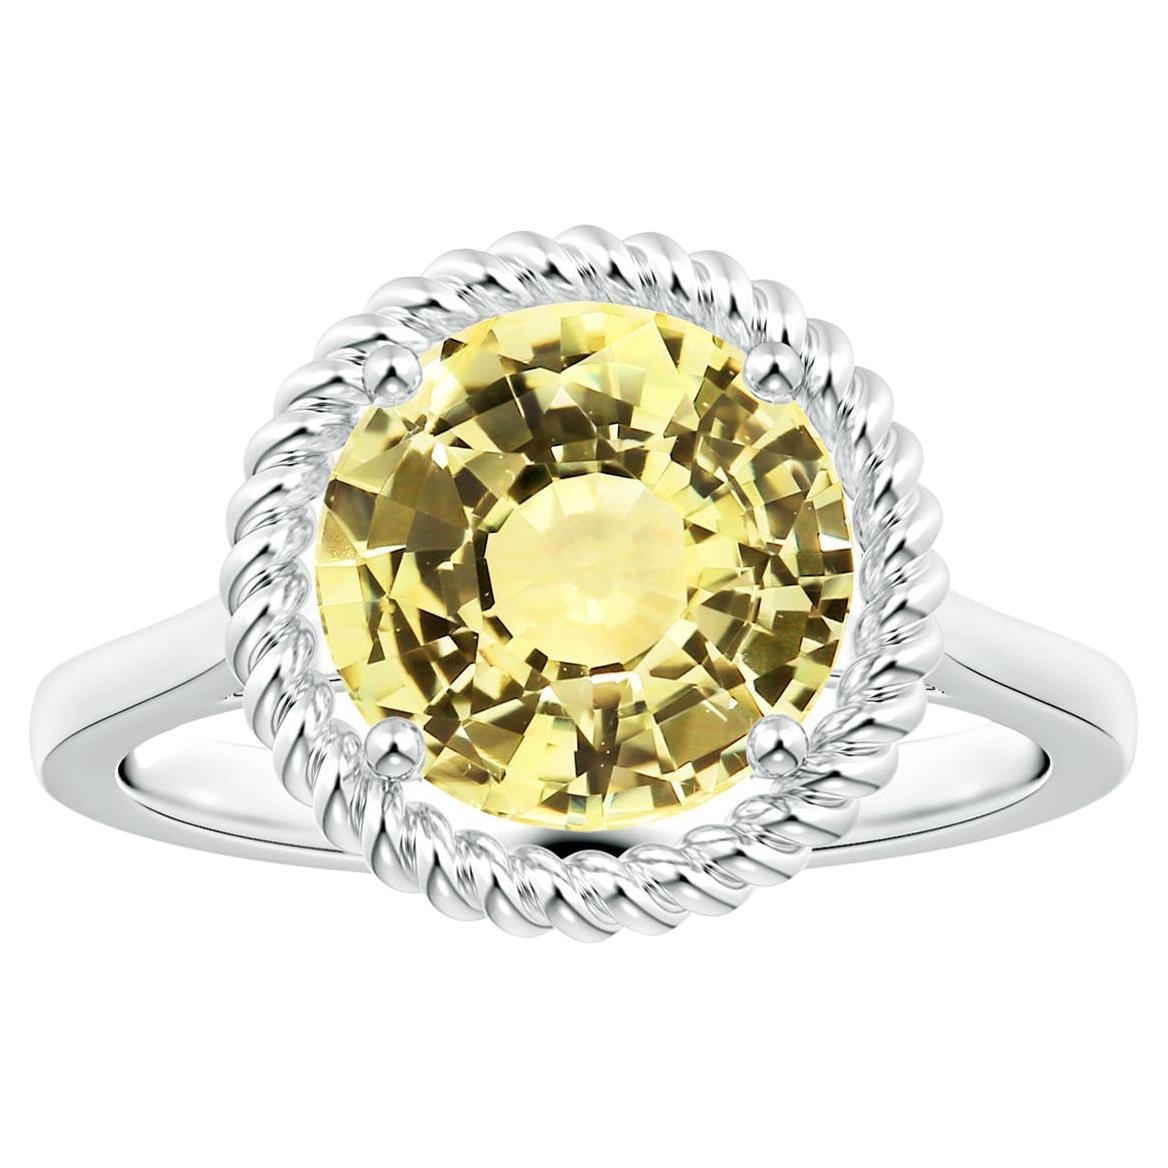 For Sale:  Angara Gia Certified Natural Yellow Sapphire Halo Ring in White Gold